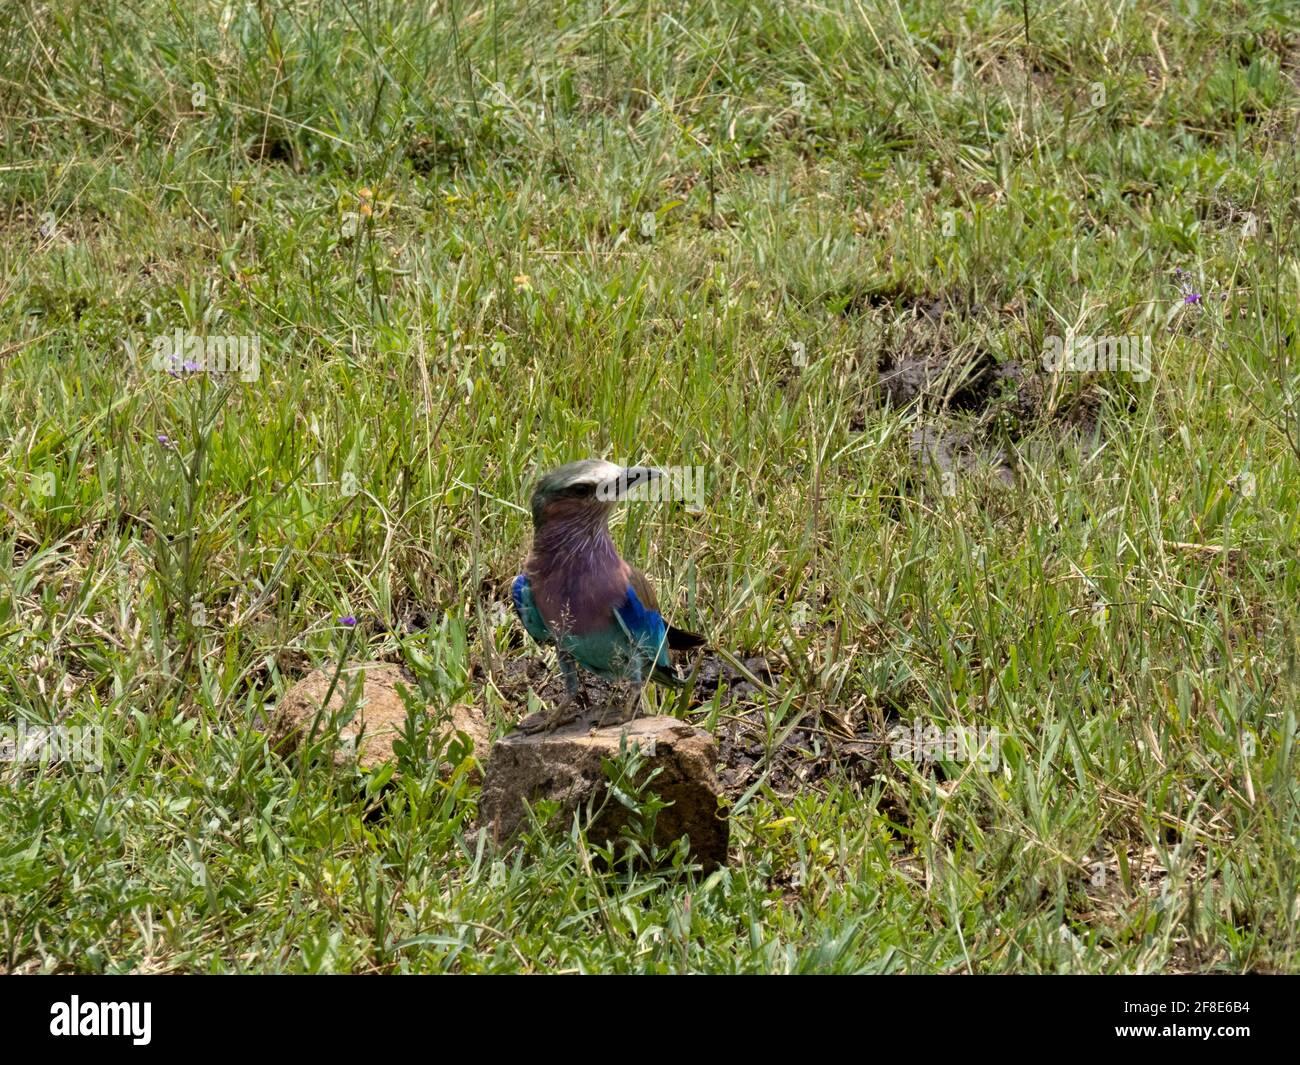 Serengeti National Park, Tanzania, Africa - February 29, 2020: Lilac breasted roller in grass of Serengeti Stock Photo